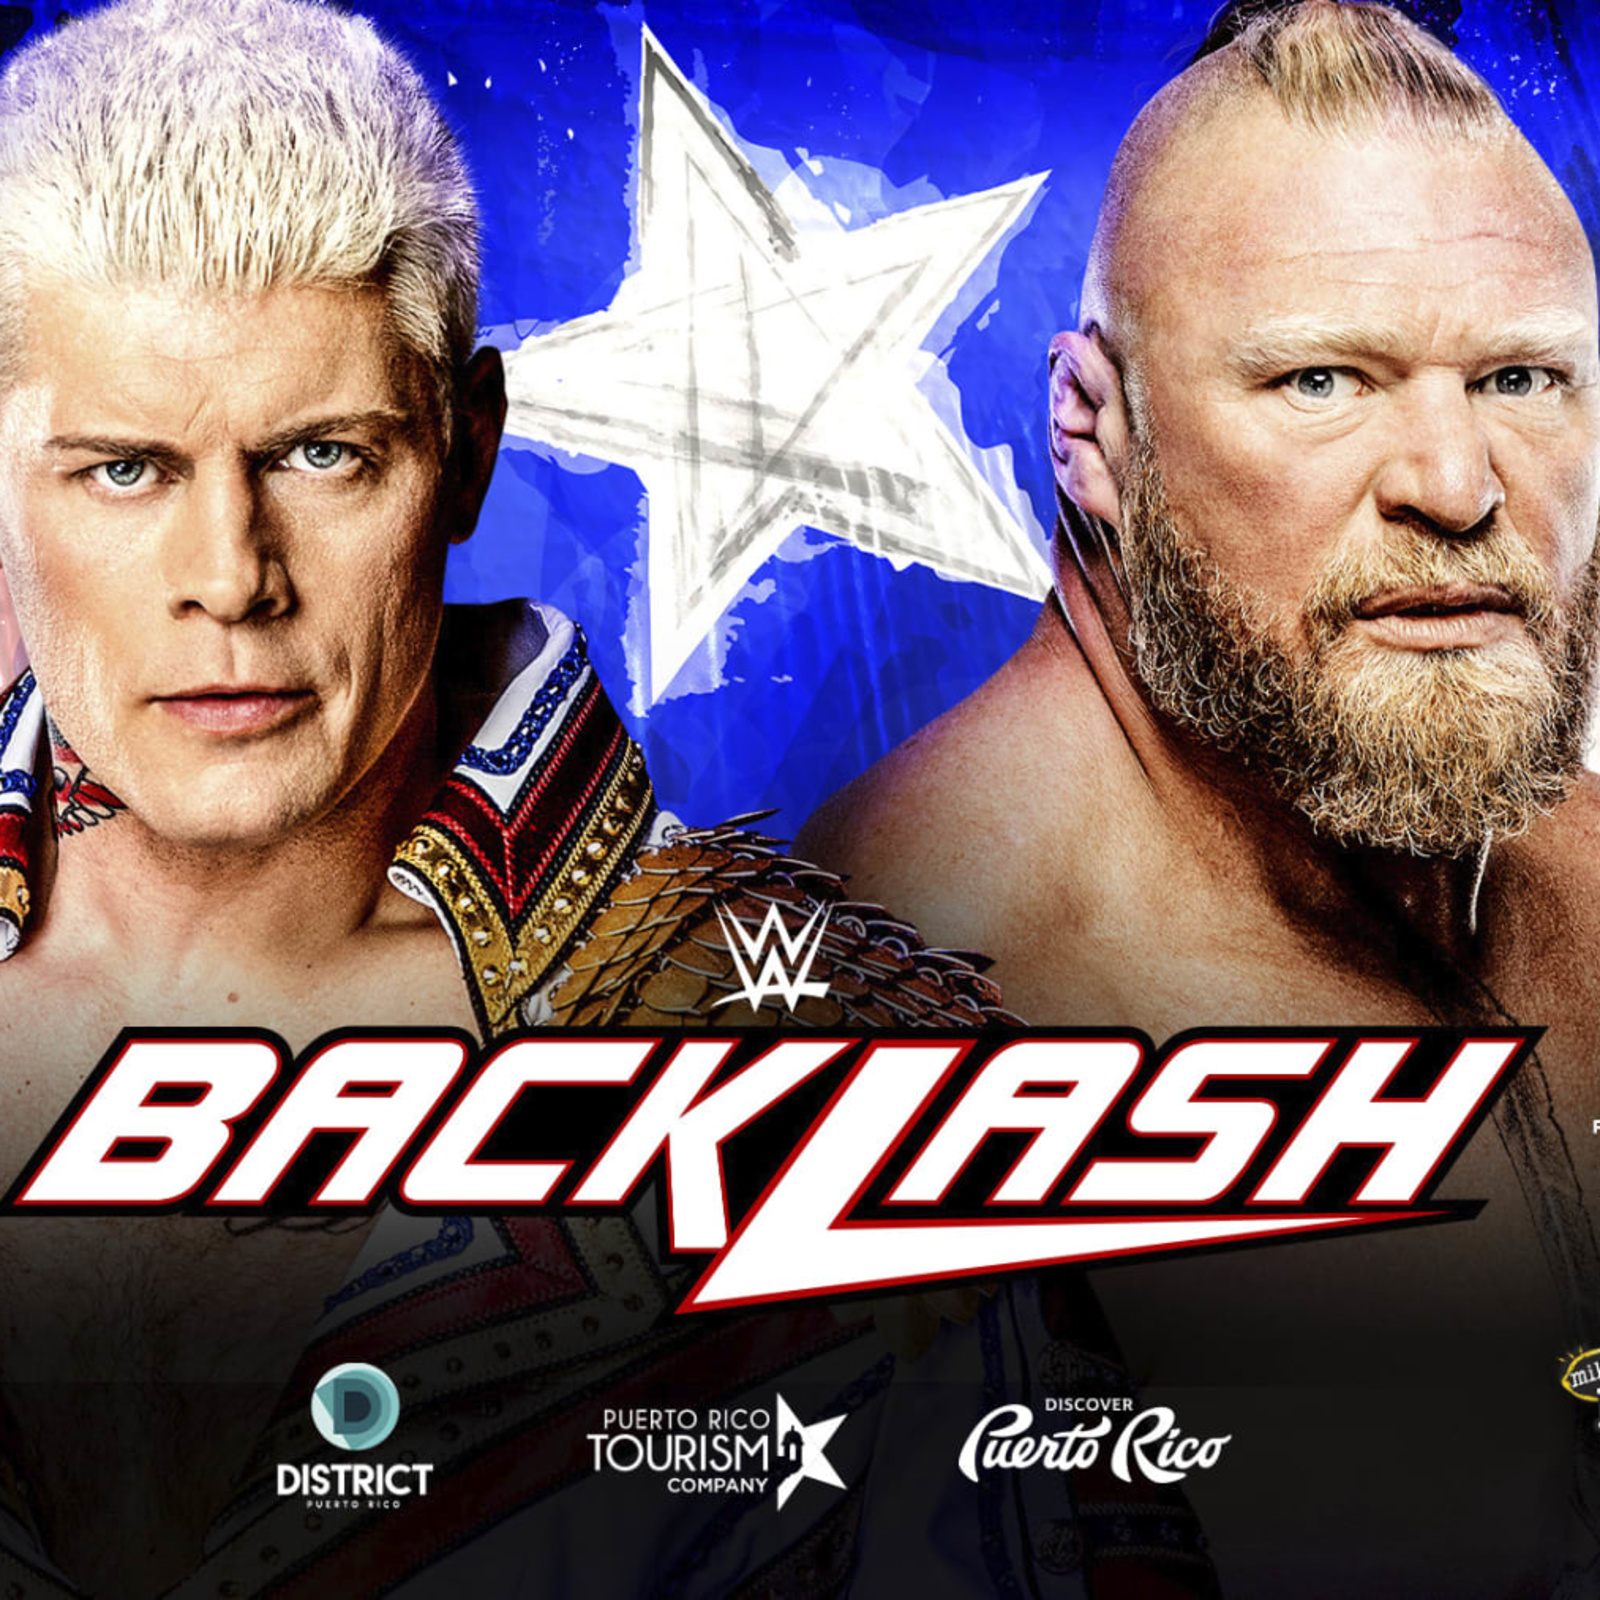 The Cody Rhodes Story Takes Odd Turn with Weak WWE Backlash Win vs